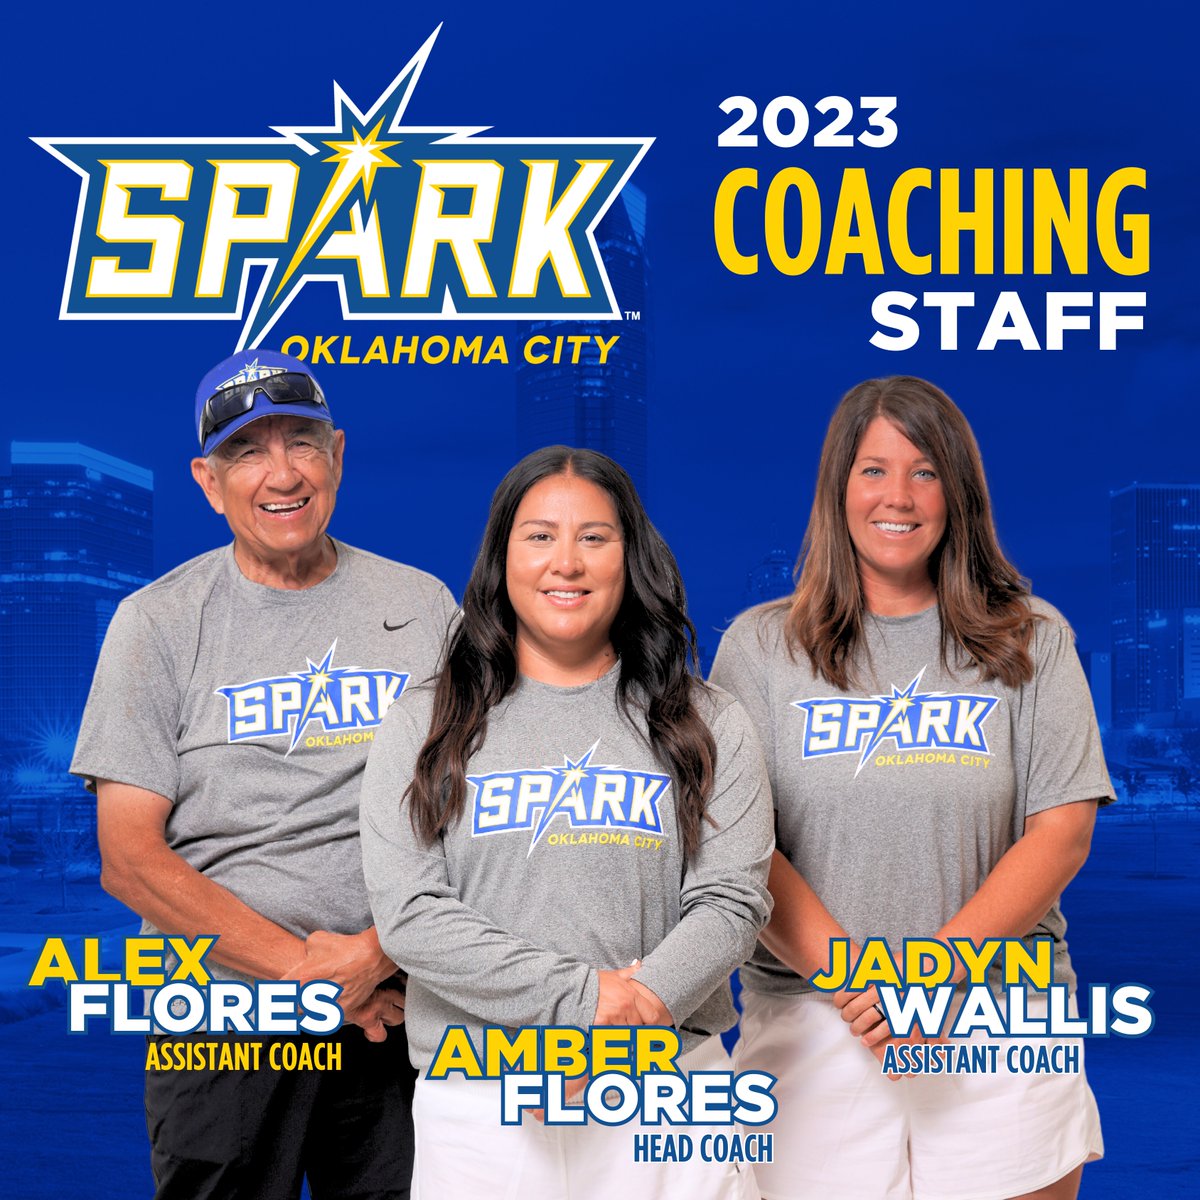 Meet our 2023 Coaching Staff! Off to a great start, we are confident this staff can bring success to our program!

#BeTheSpark